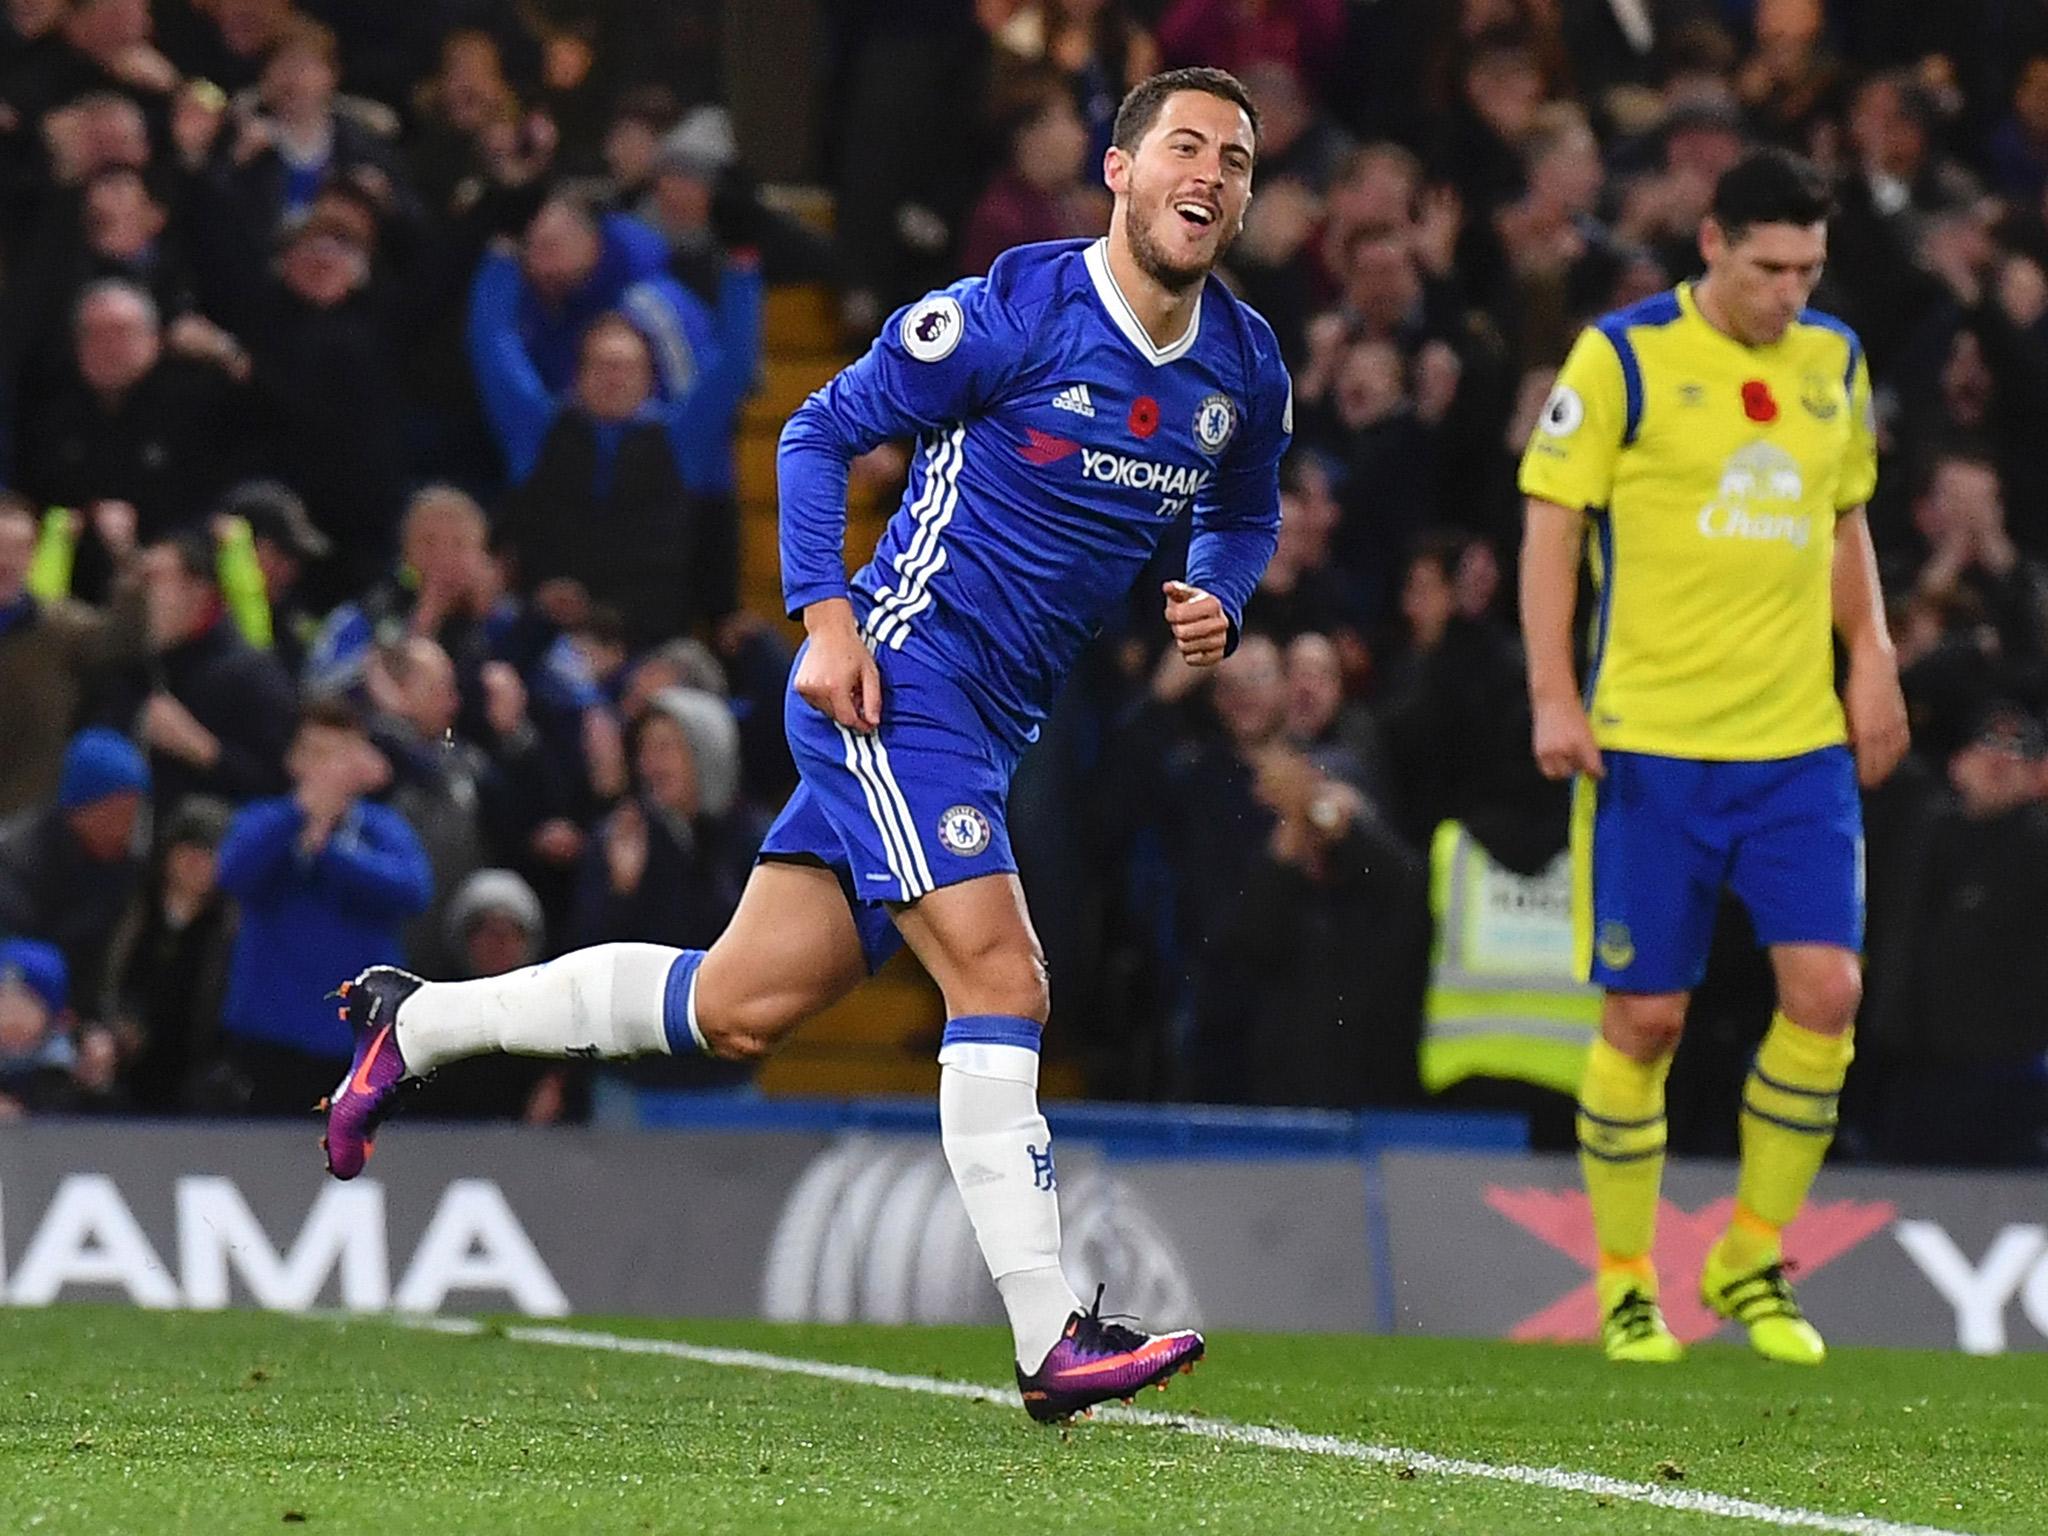 Hazard hobbled off during Chelsea's victory over West Brom